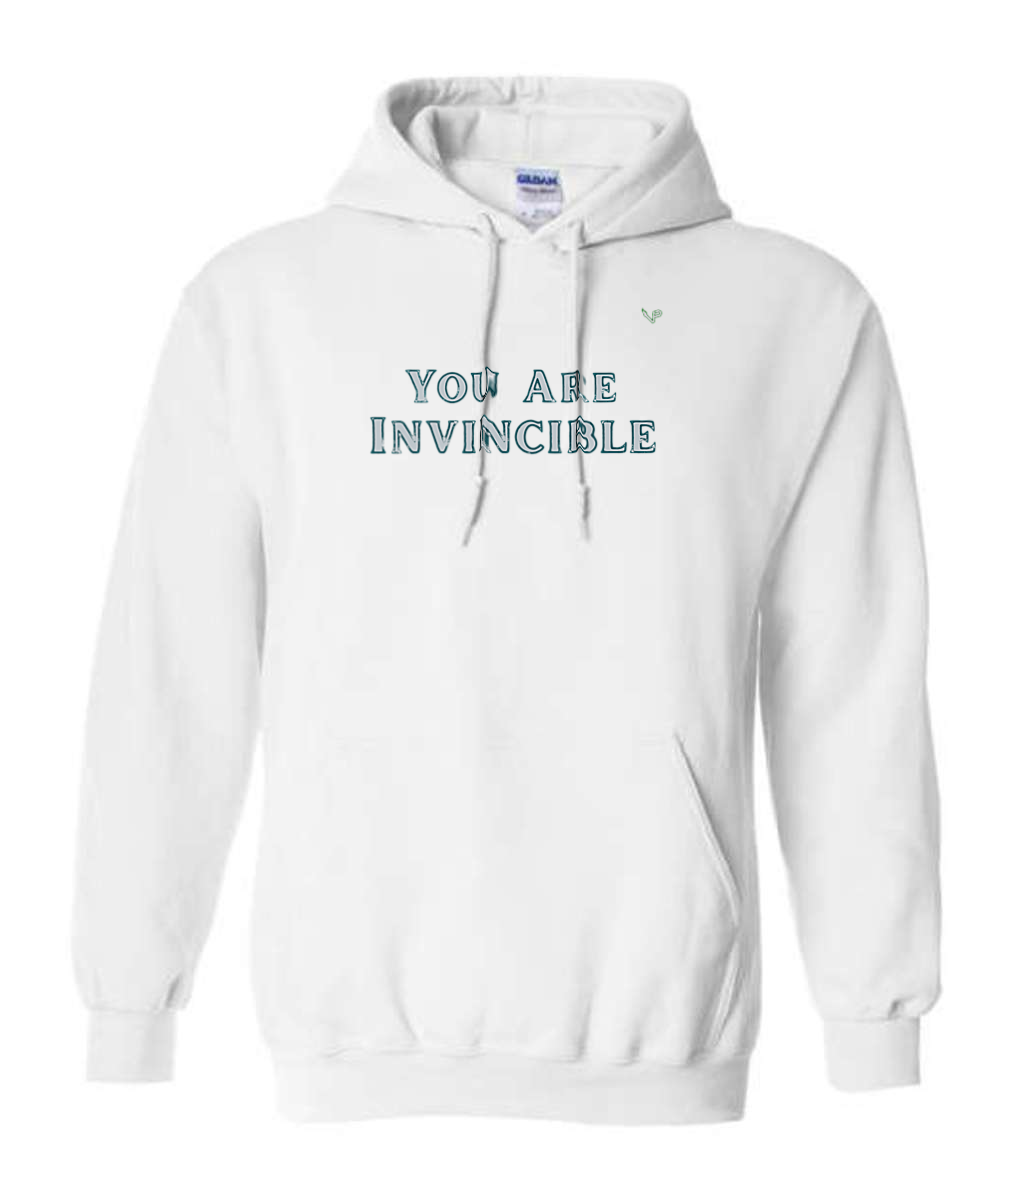 Vince Papale You Are Invincible Hoodie